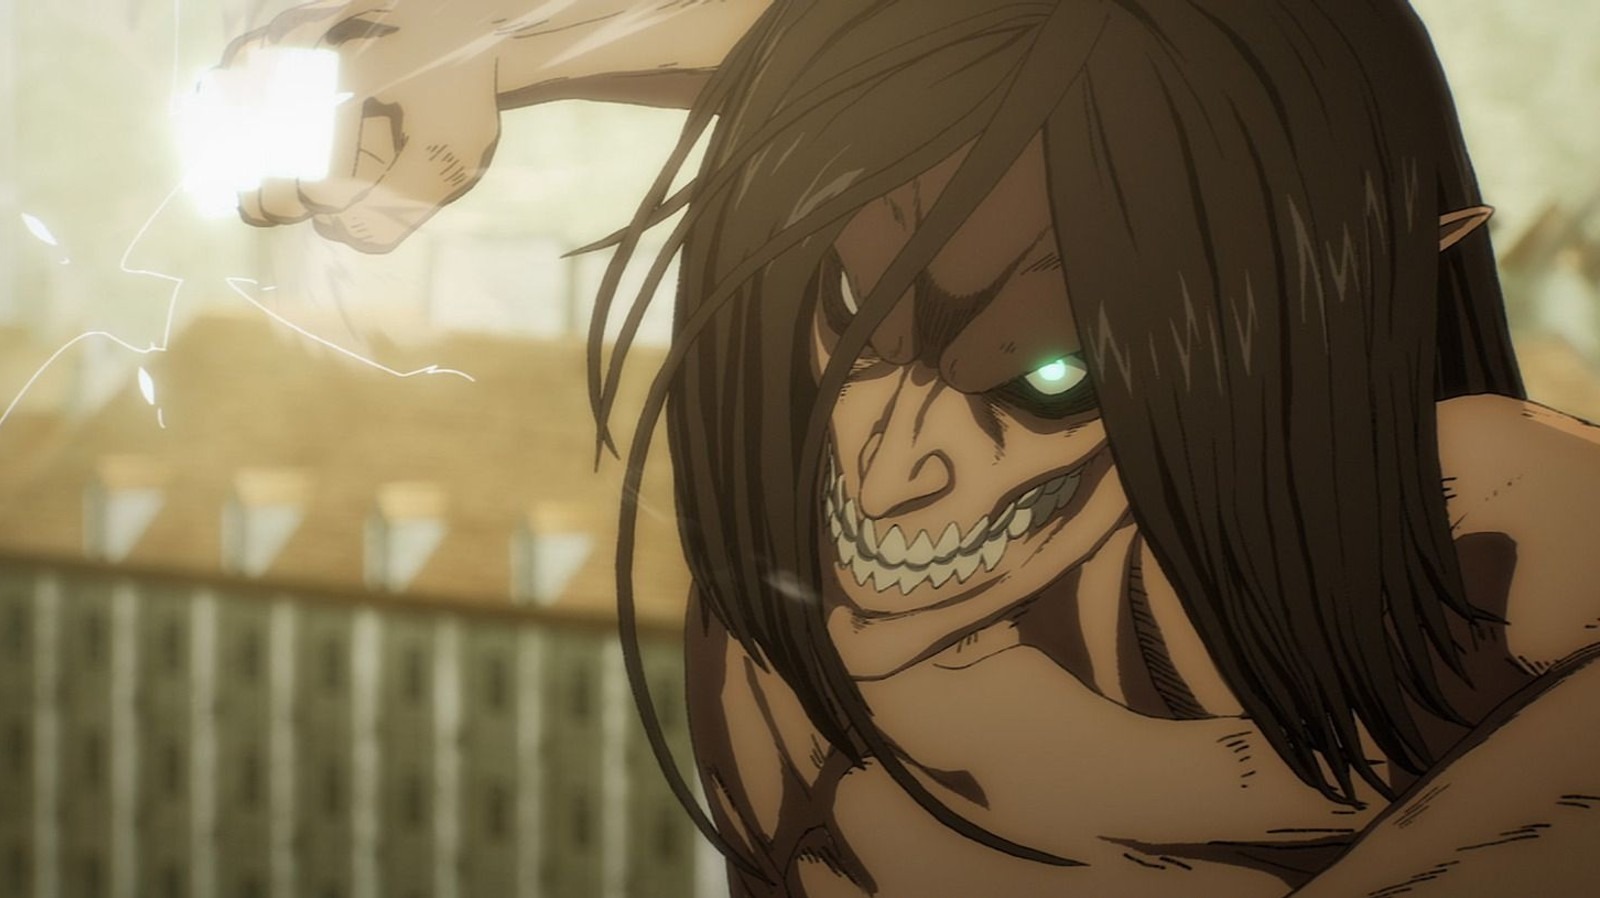 Attack on Titan Final Season Part 3: Release Date, How to Watch, Trailers &  More - Crunchyroll News